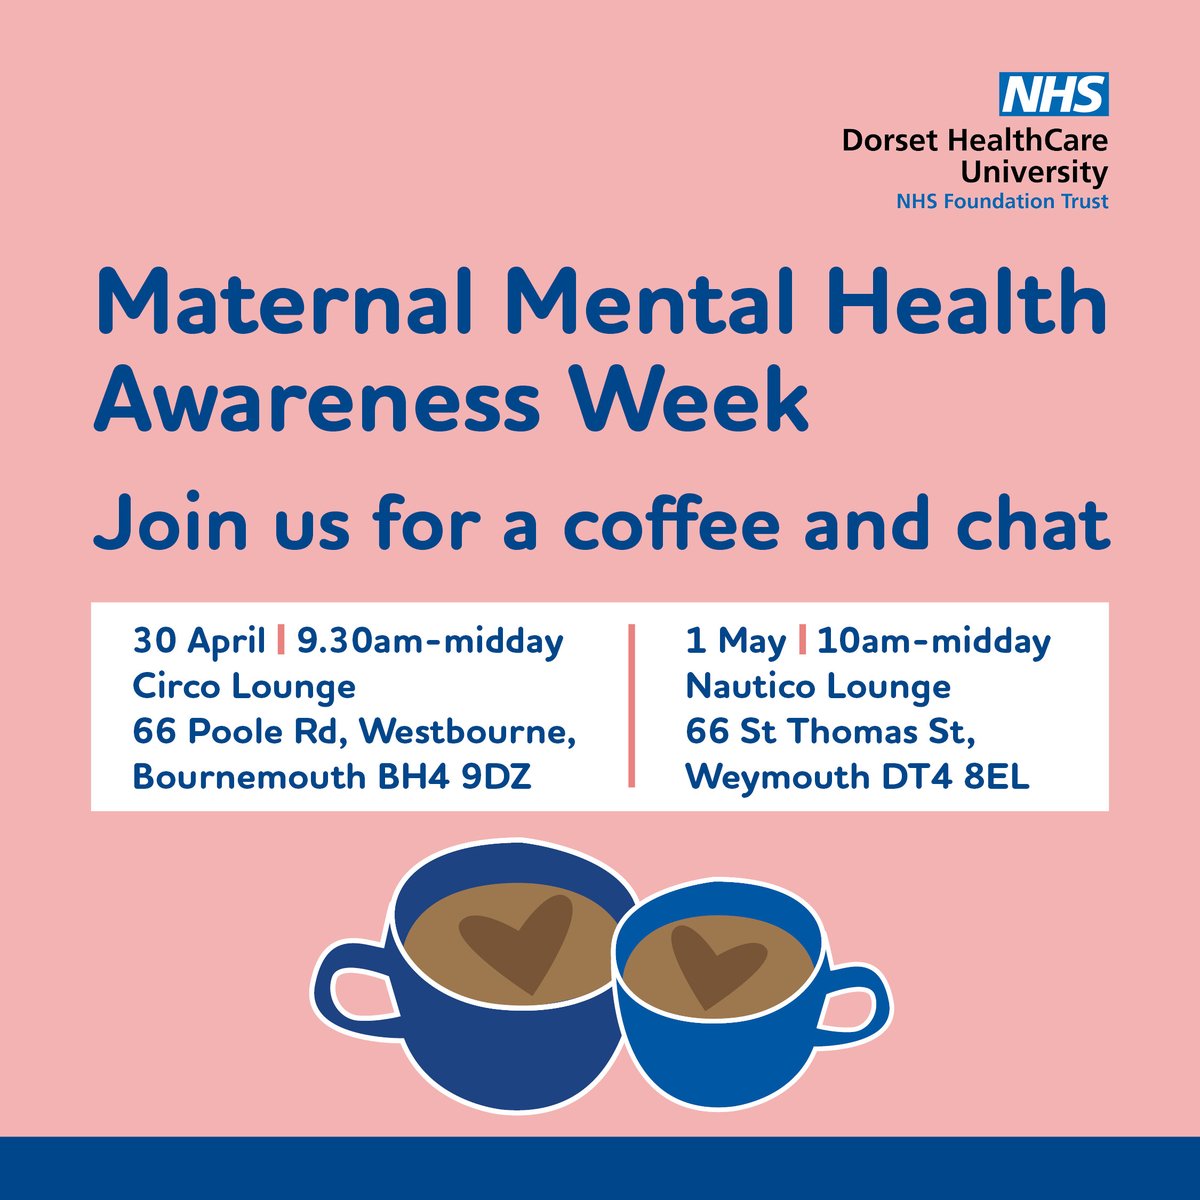 This week is Maternal Mental Health Week and @dorsethealthcare will be running 2 coffee mornings. Please share with friends and family so they can join the coffee mornings, meet the team and find out about support available. dorsethealthcare.nhs.uk/perinatal-serv…